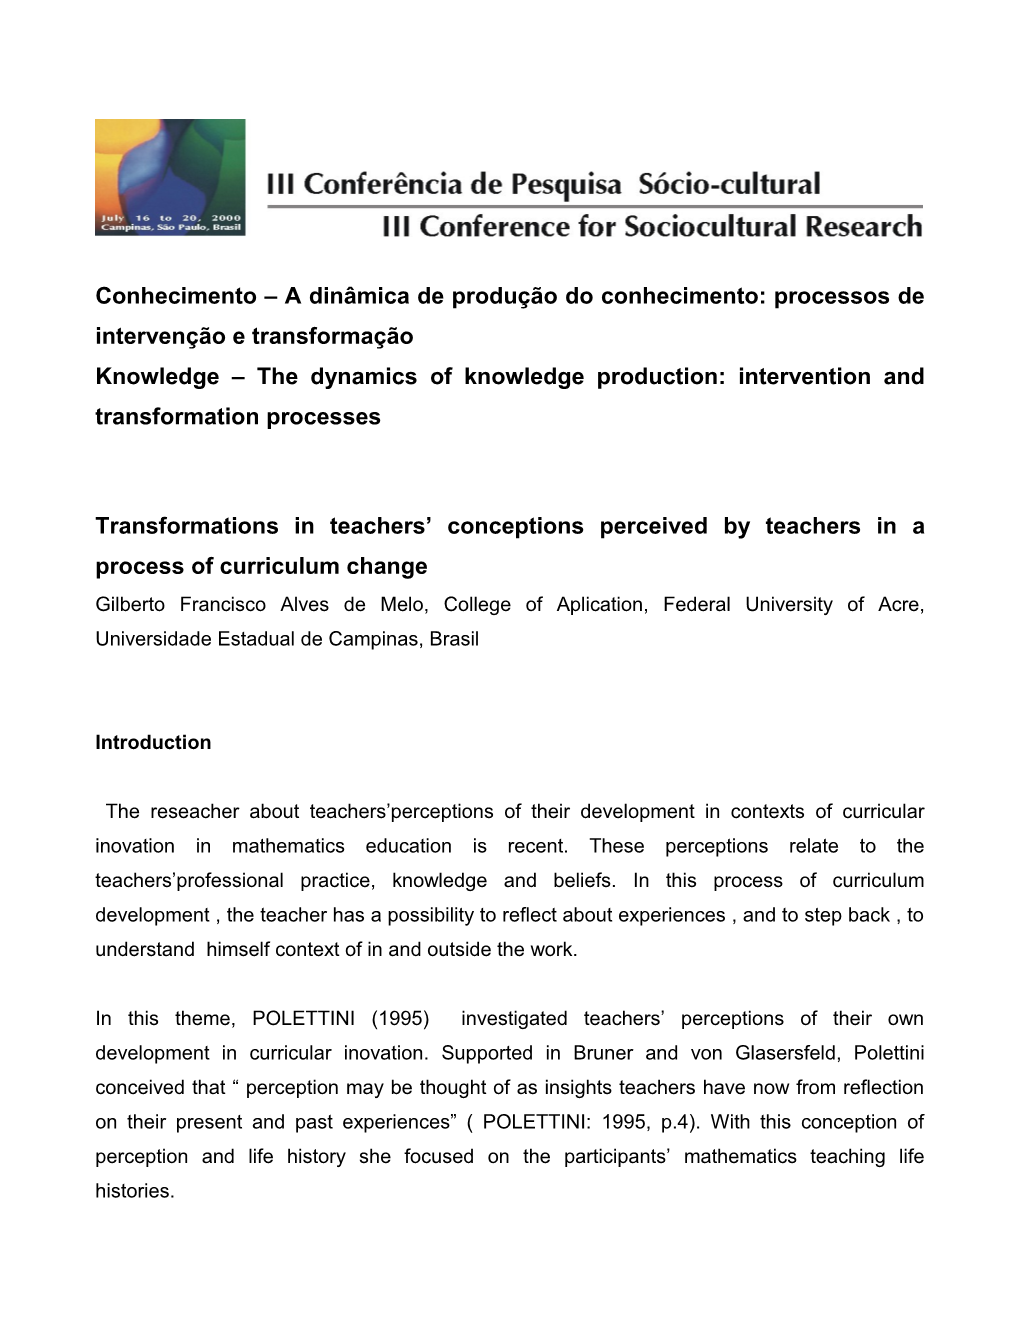 Transformations in Teachers Conceptions Perceived by Teachers in a Process of Curriculum Change